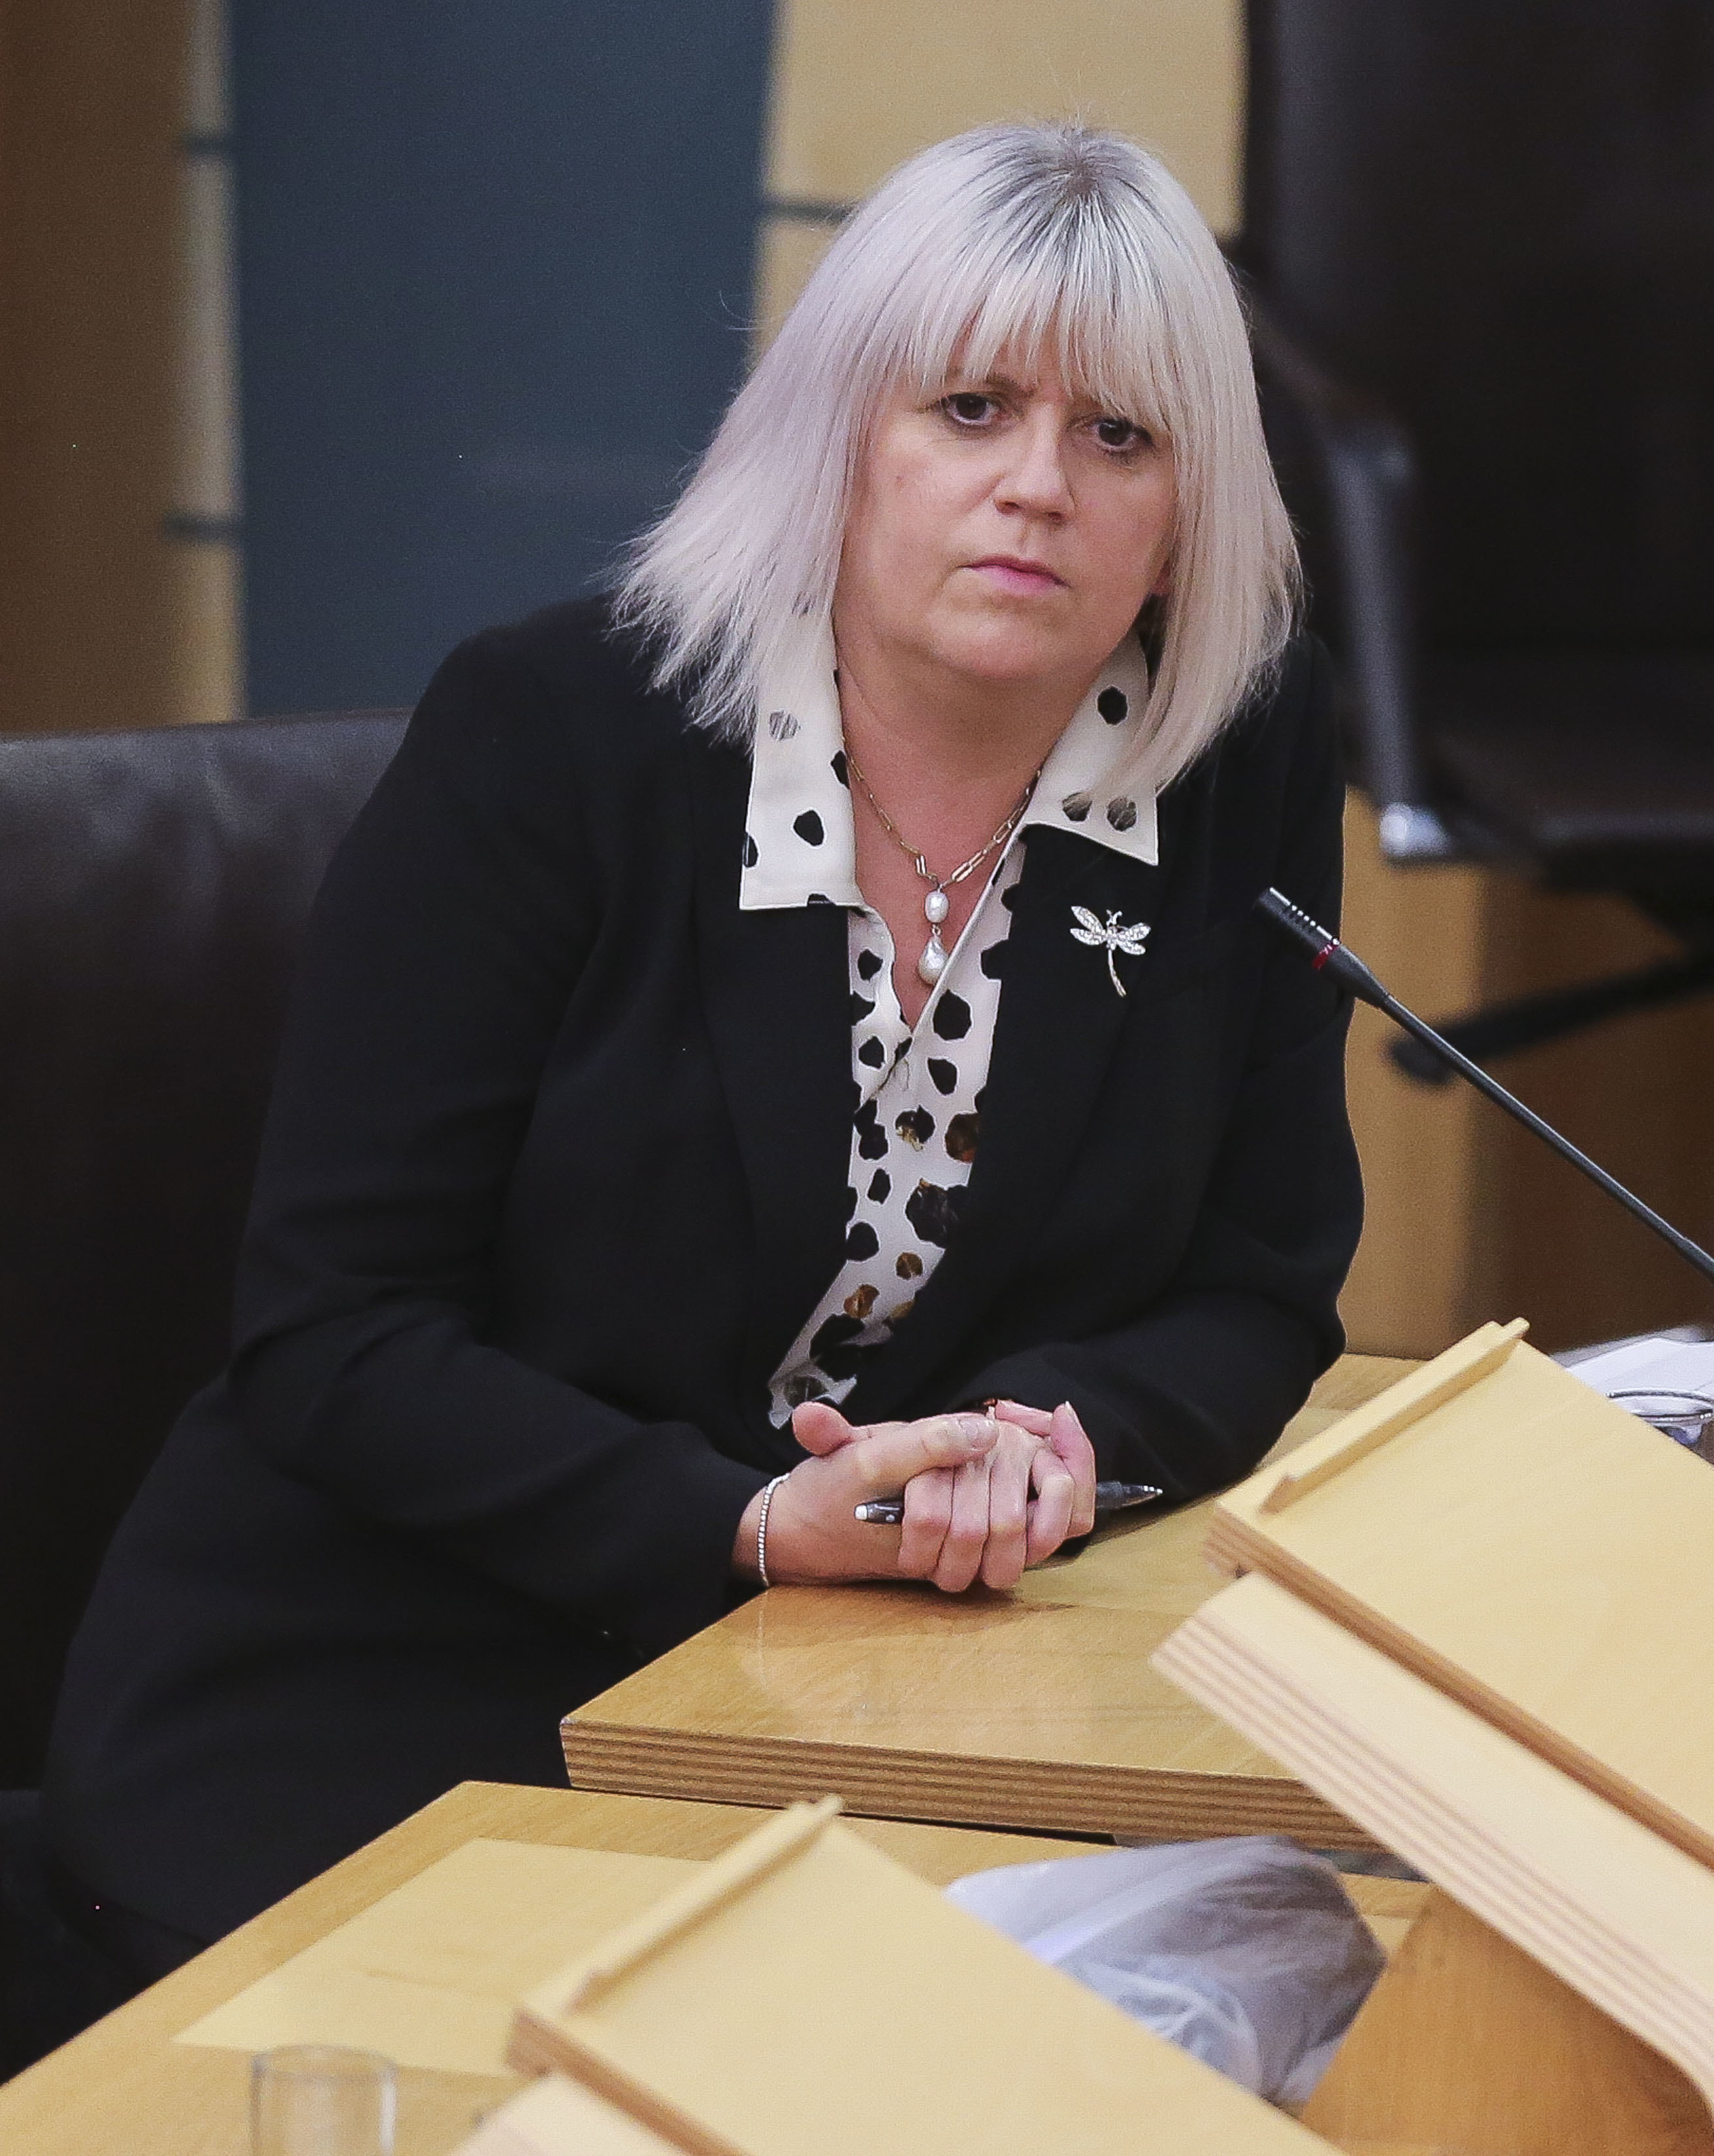 Sue Webber seated at a desk in the Holyrood debating chamber, with her hands clasped together